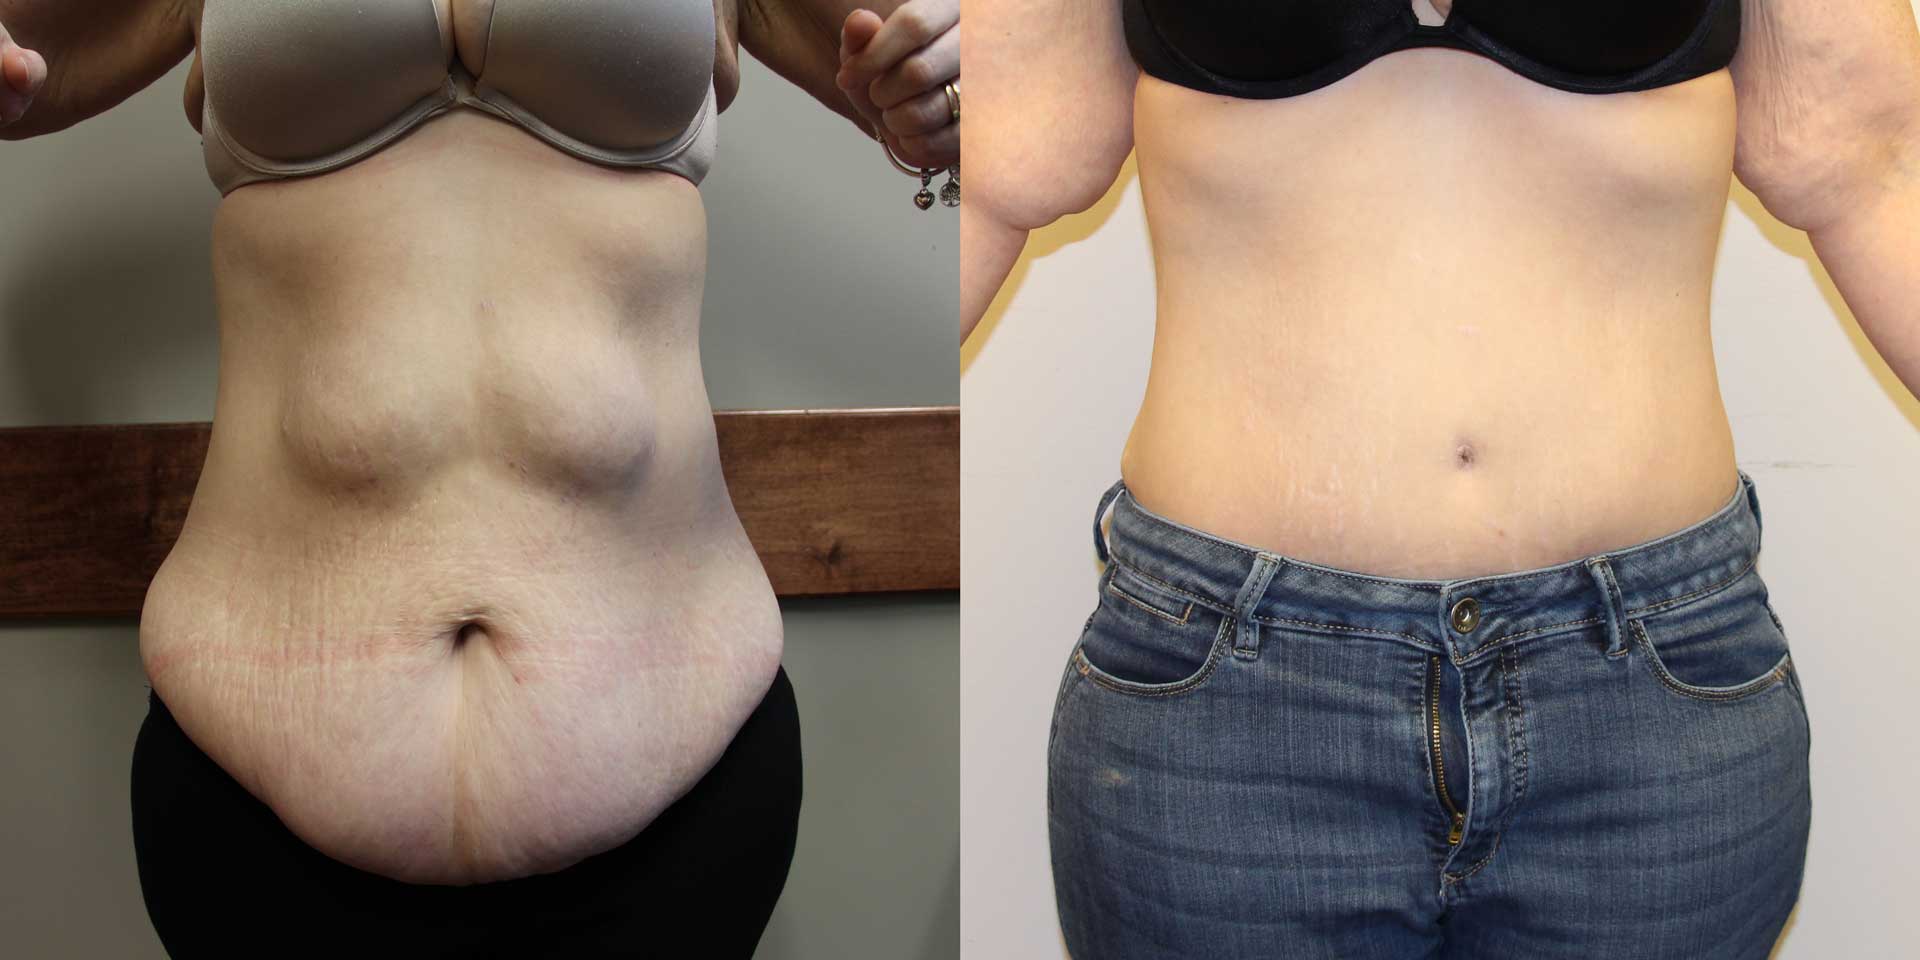 Tummy Tuck (Abdominoplasty) Before and After Photos - Dr Anzarut Plastic  Surgery